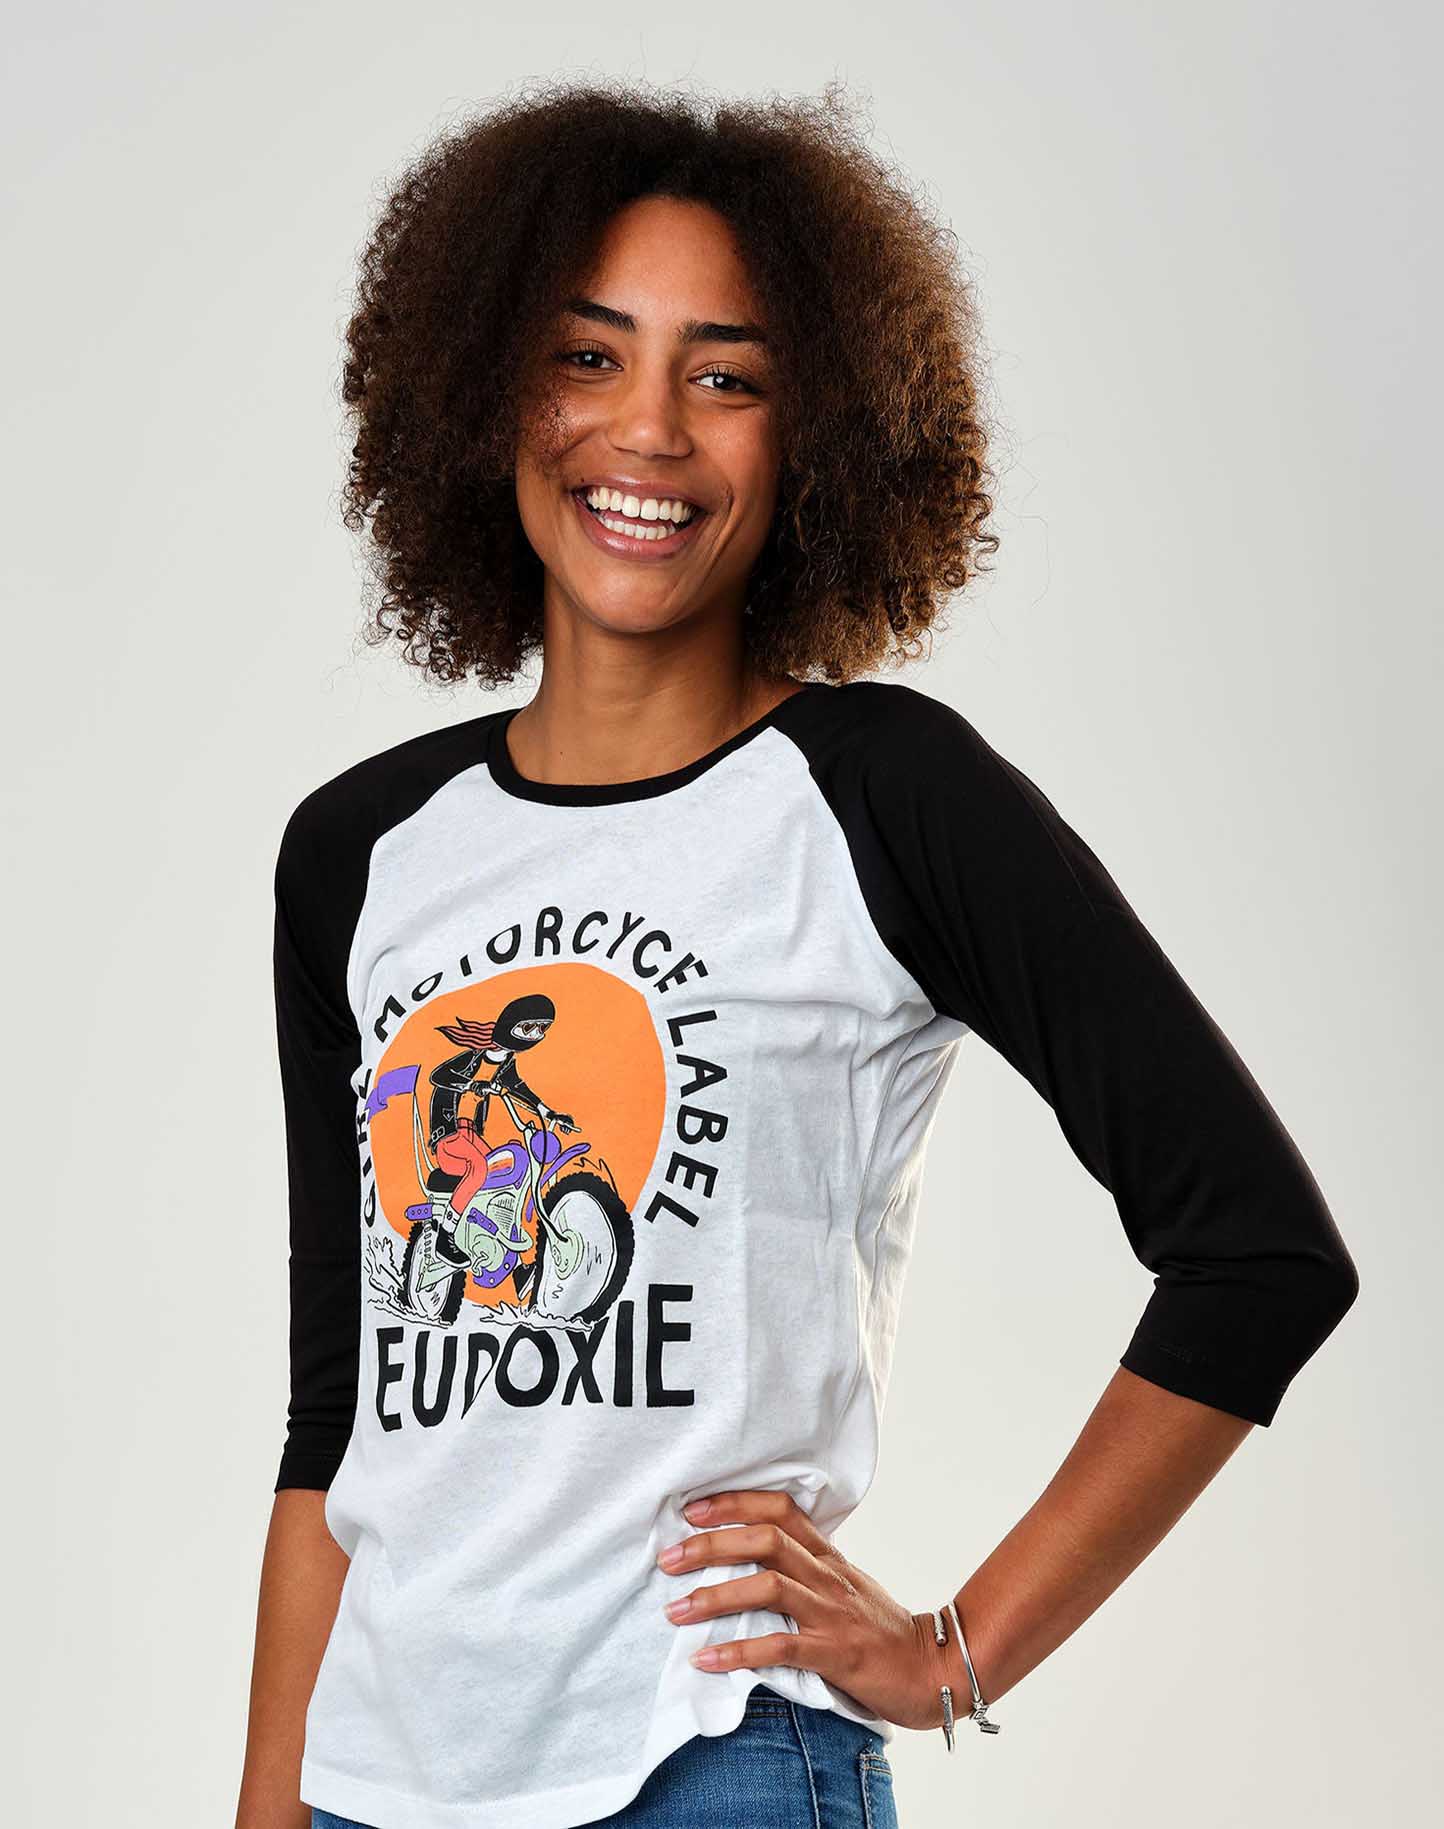 A young woman wearing black &amp; white baseball motorcycle t-shirt from Eudoxie 